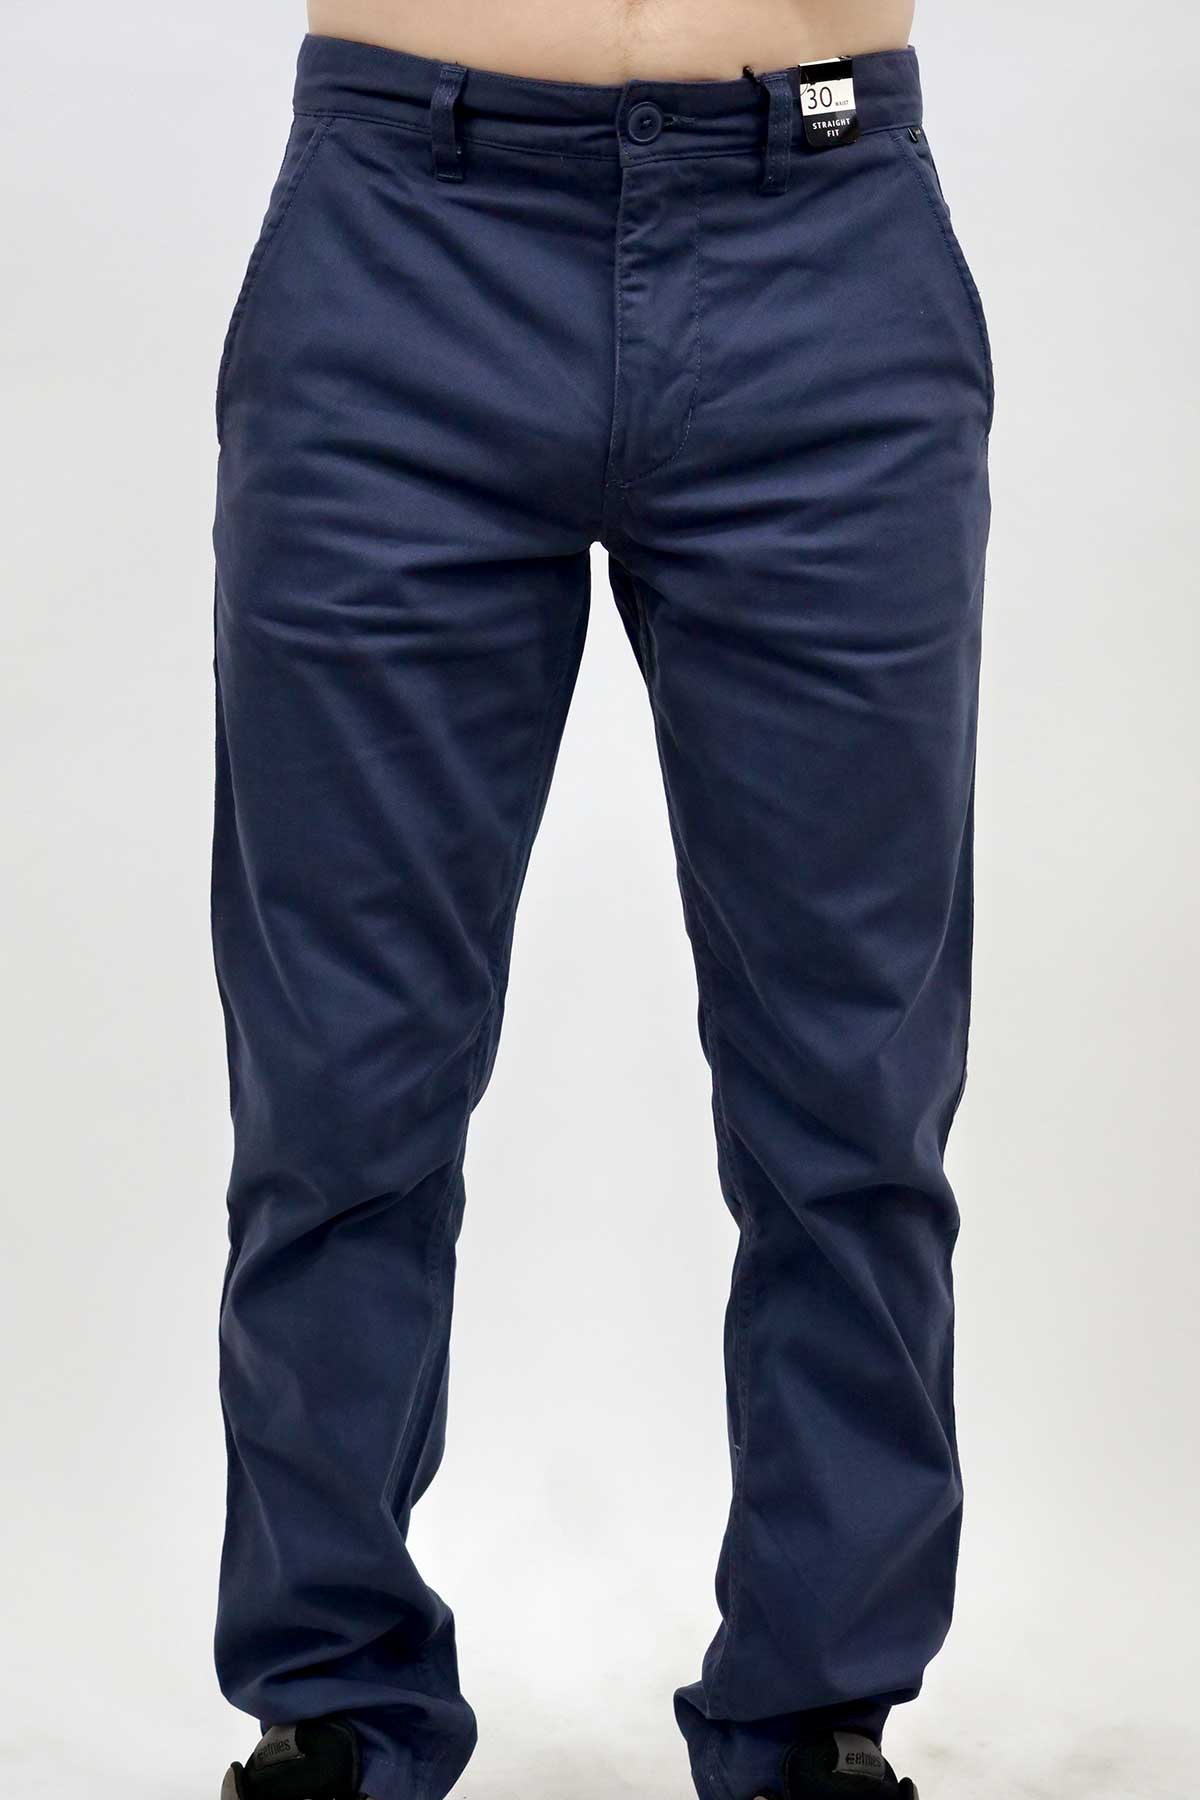 Rip Curl Mens Pant Re Entry Chino navy front